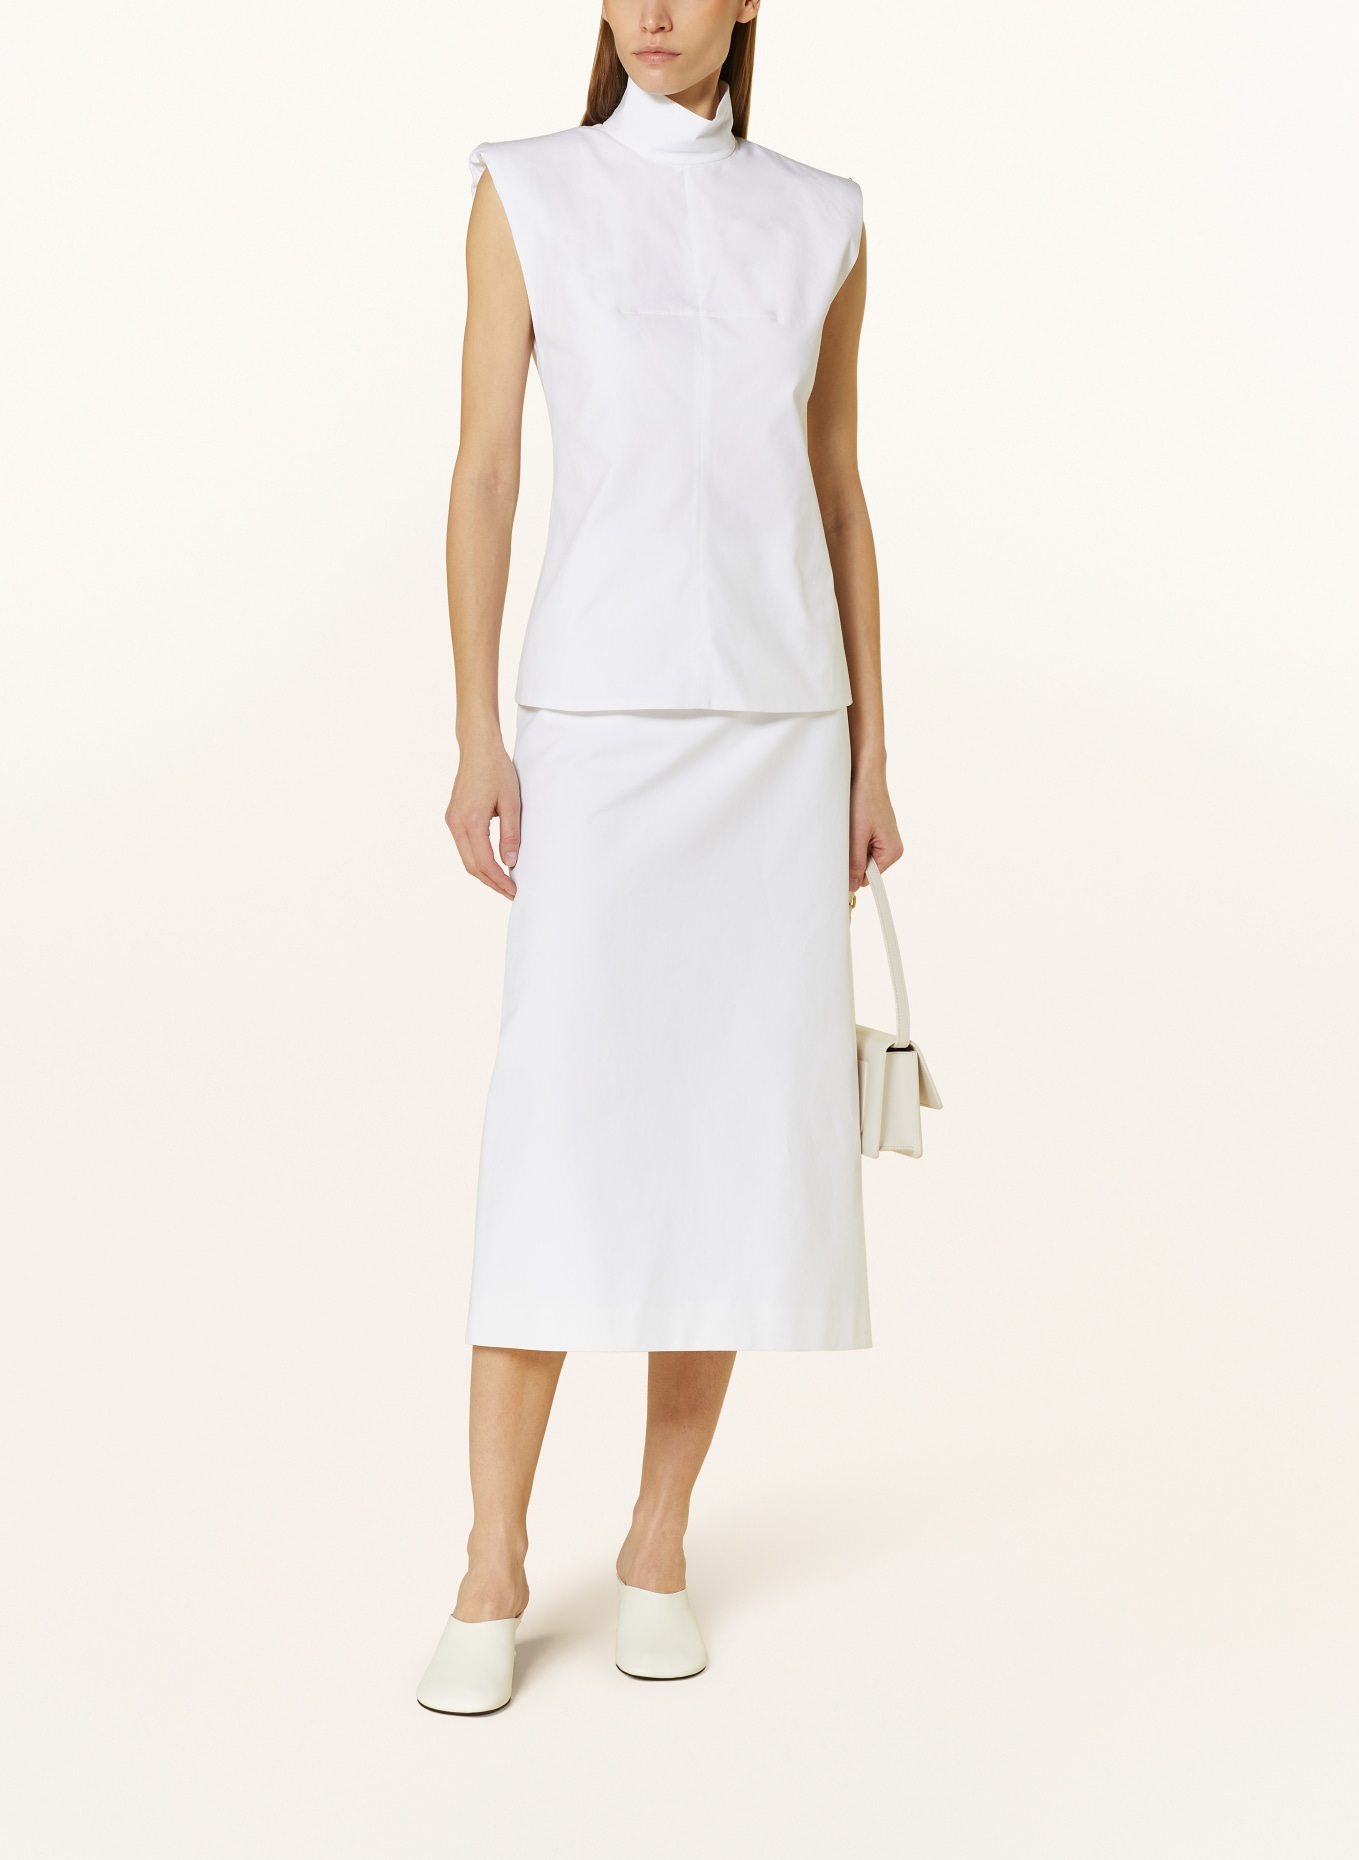 SPORTMAX Blouse top CANNETI, Color: WHITE (Image 2)